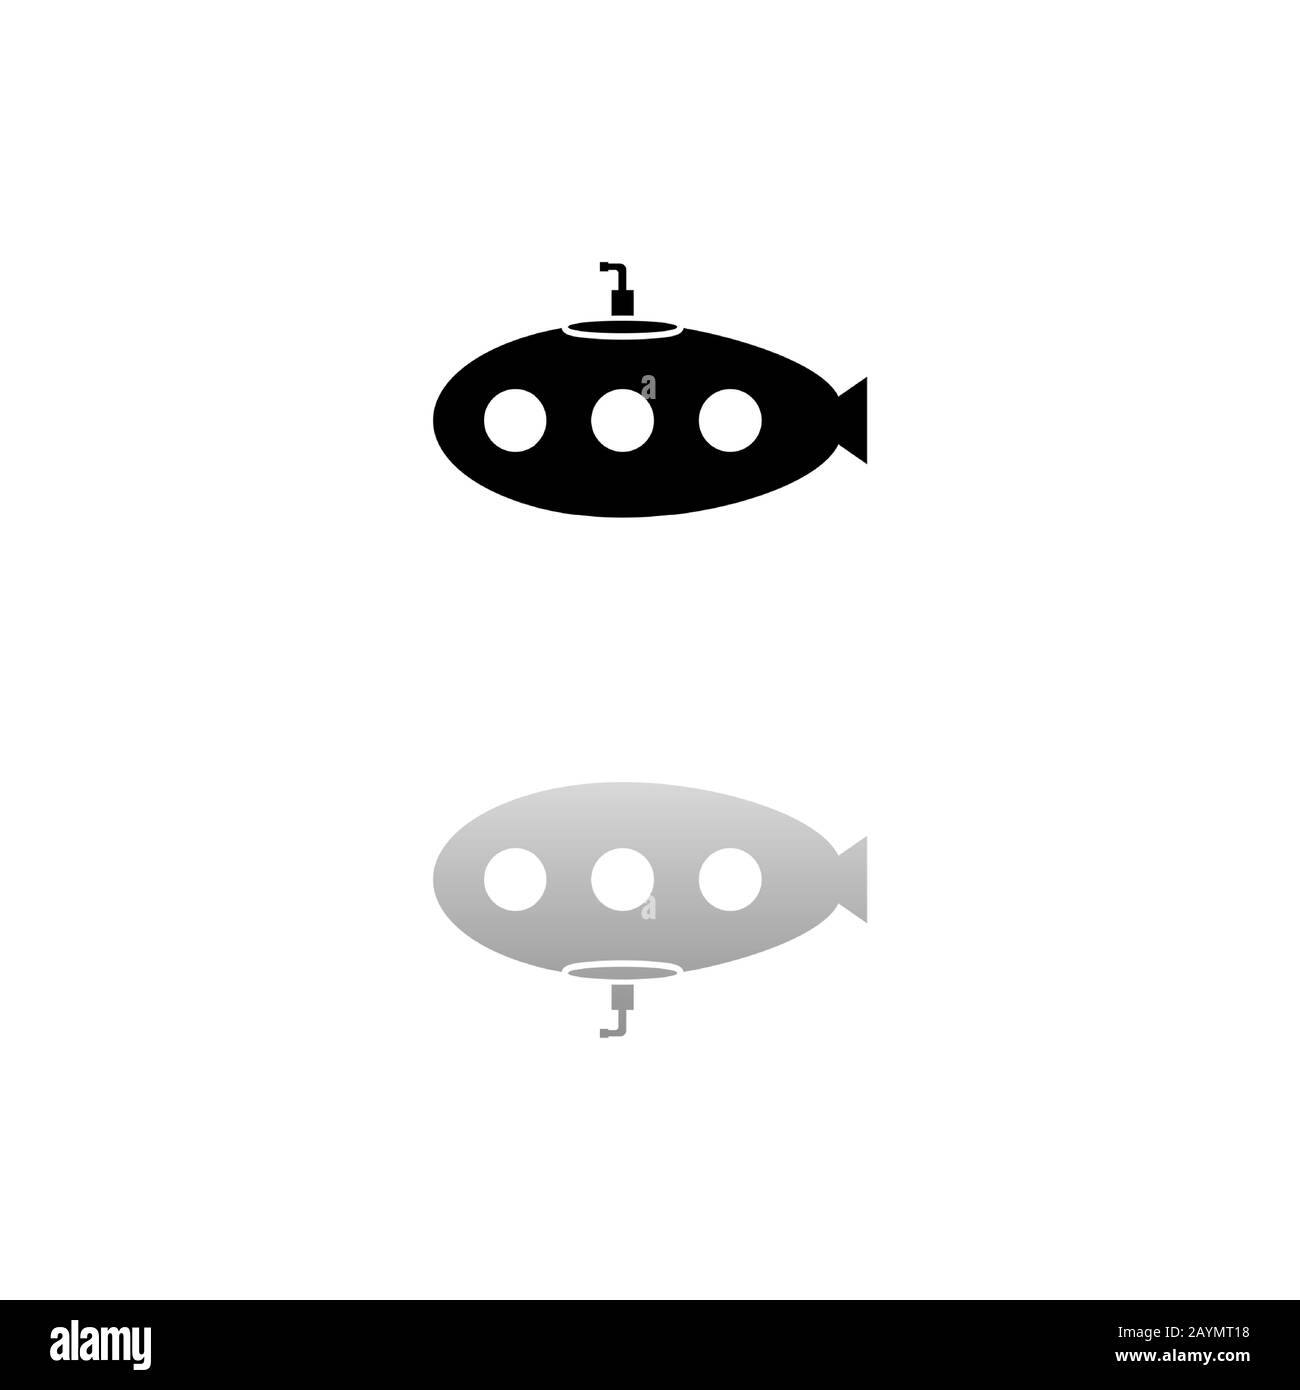 Submarine with periscope. Black symbol on white background. Simple illustration. Flat Vector Icon. Mirror Reflection Shadow. Can be used in logo, web, Stock Vector